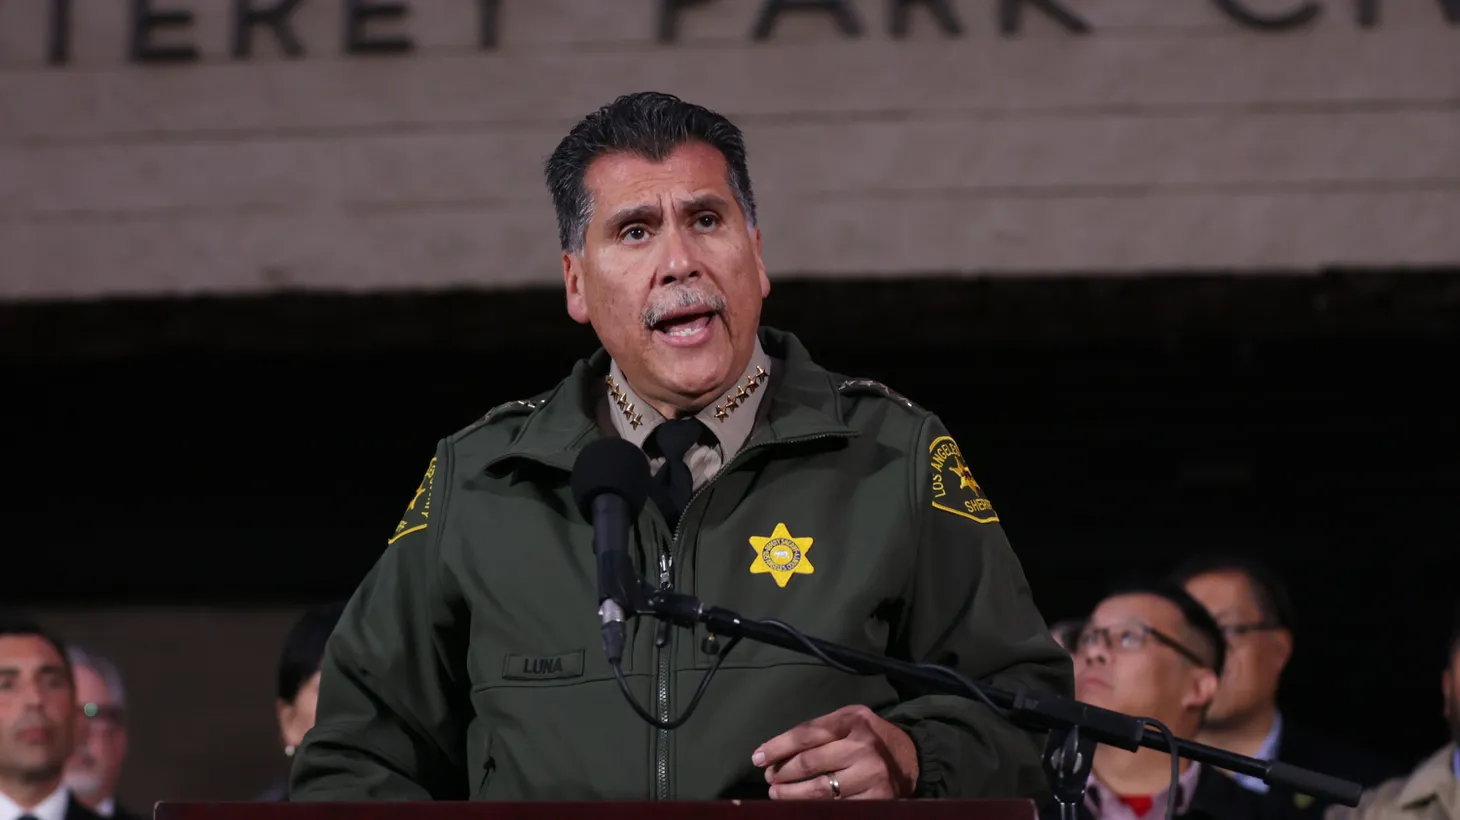 Los Angeles County Sheriff Robert Luna briefs the media outside the Civic Center in Monterey Park, Calif., Sunday, Jan. 22, 2023. At least 10 people were killed and 10 others wounded in a shooting rampage at the Star Ballroom Dance Studio after a Lunar New Year celebration on Saturday, Jan. 21, 2023.